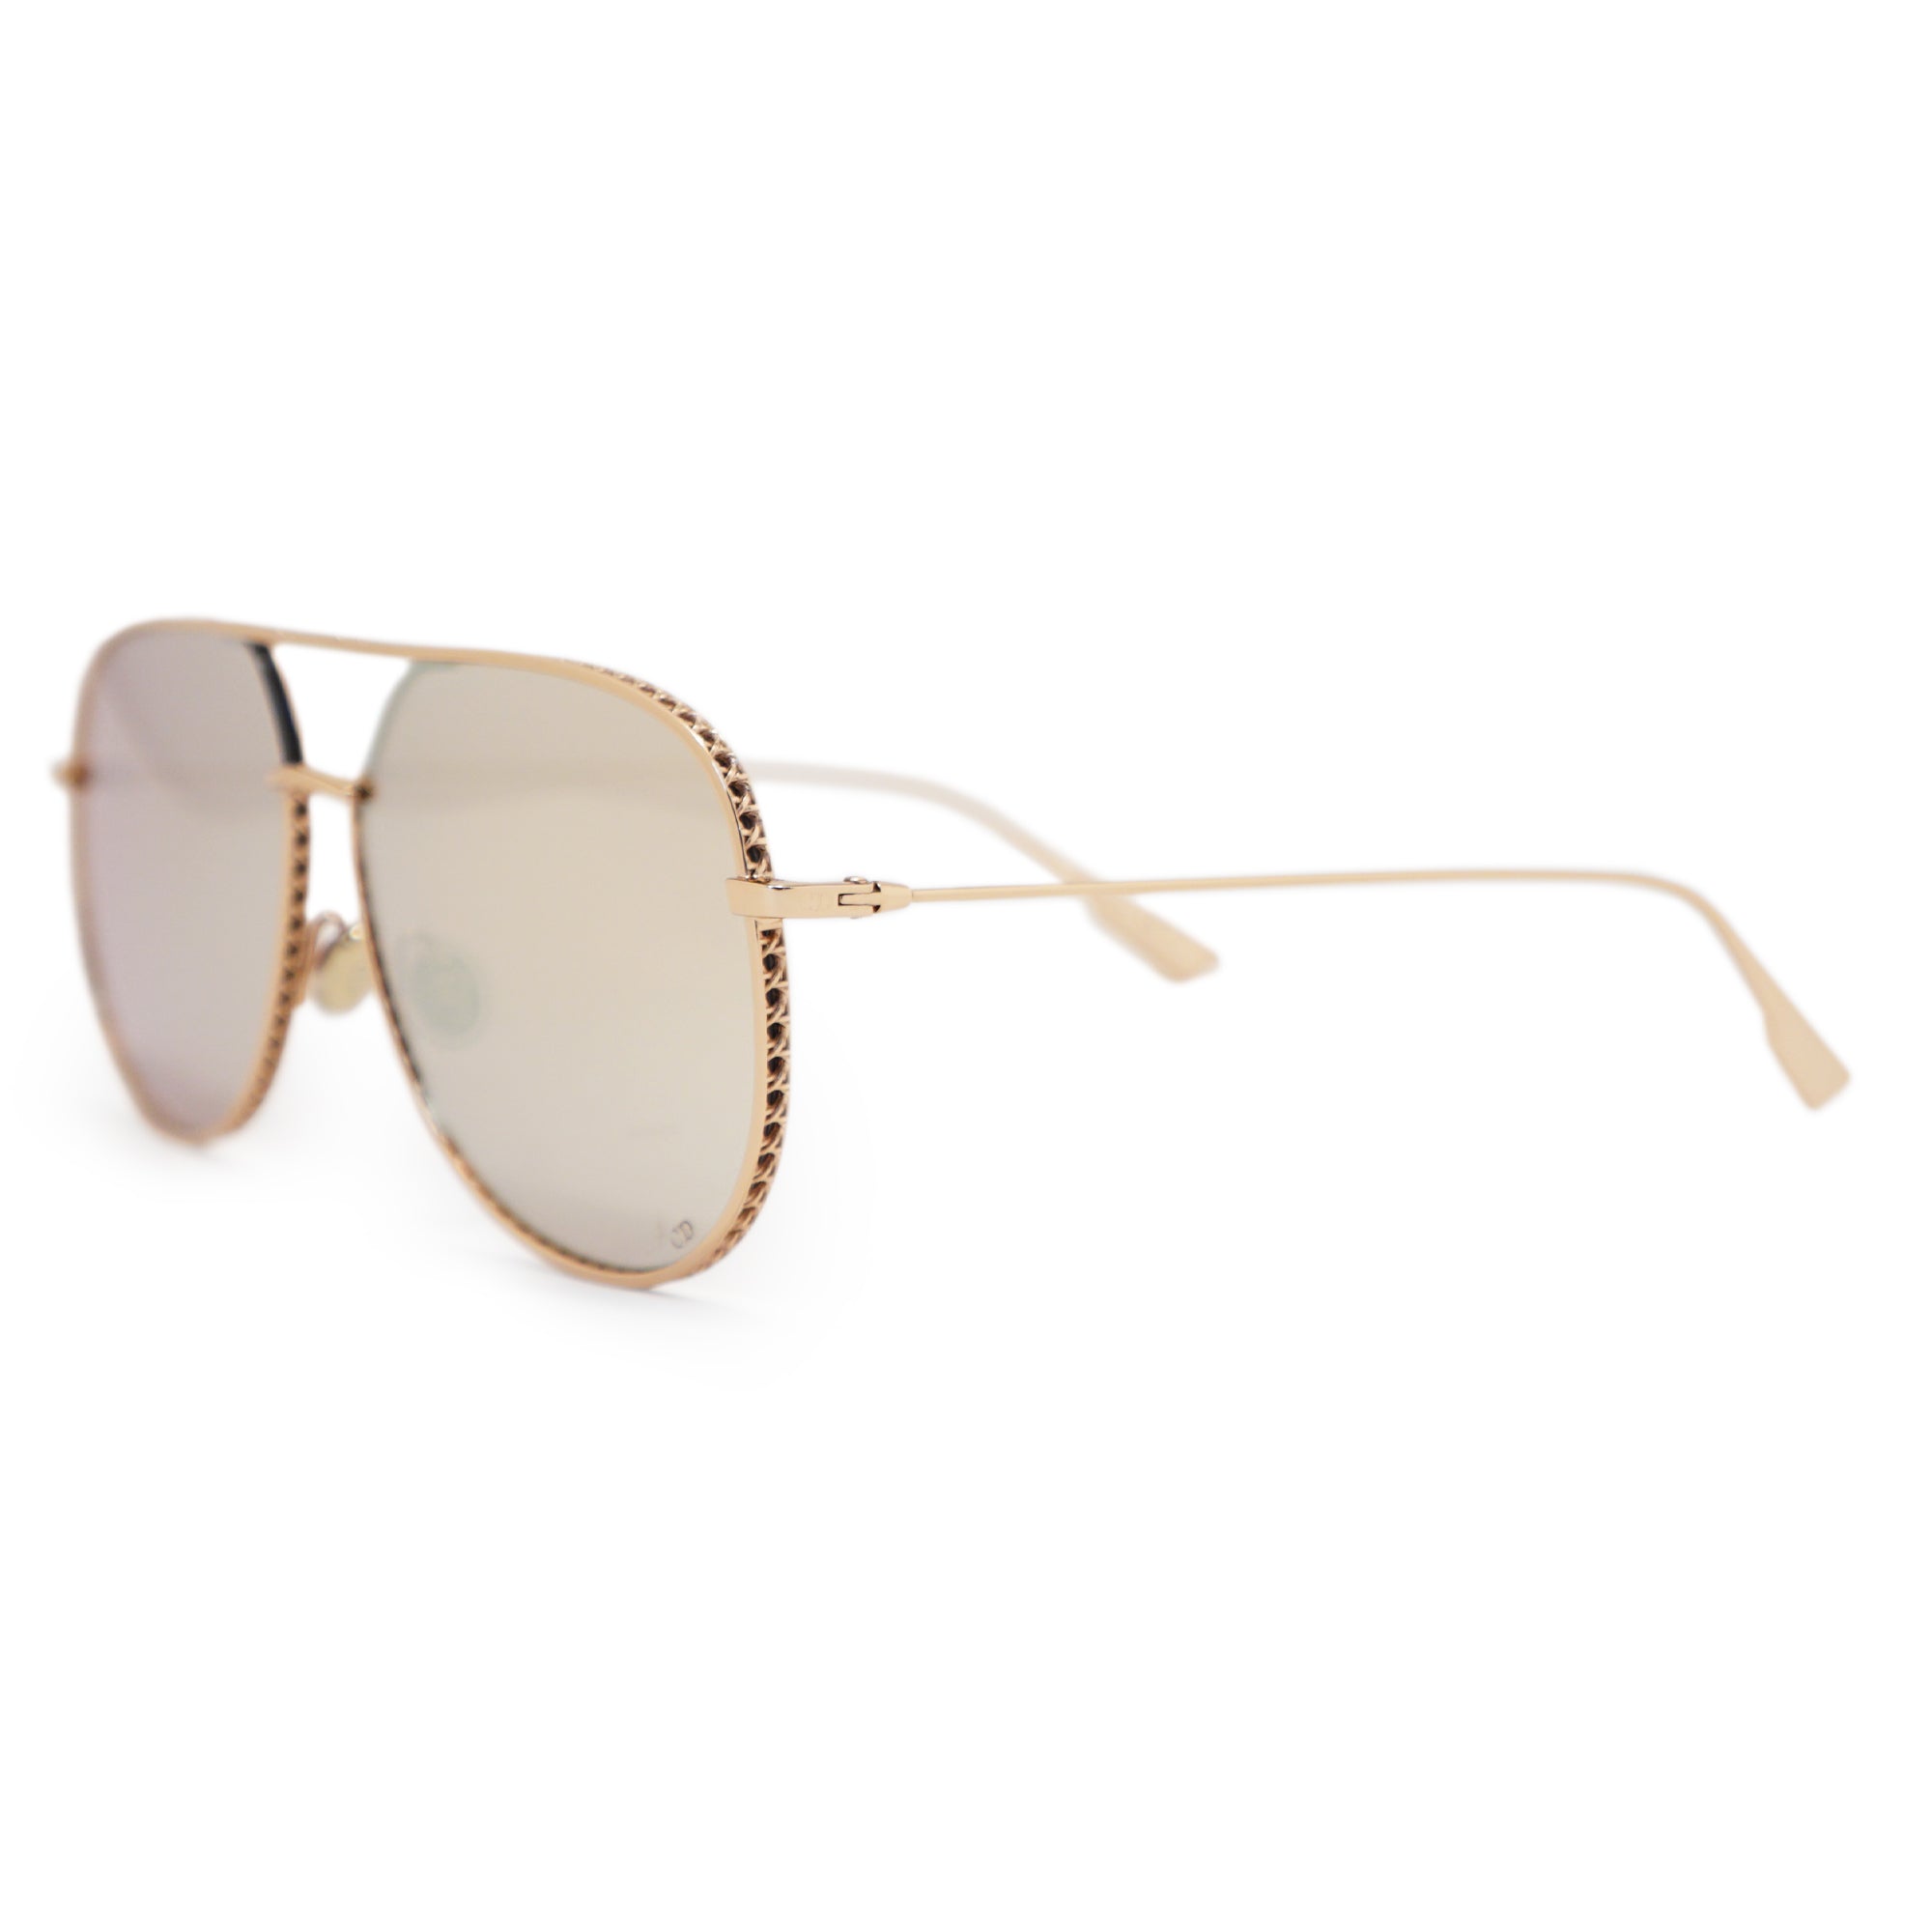 title:Dior Aviator Sunglasses ByDior DDBSQ 60;color:not applicable